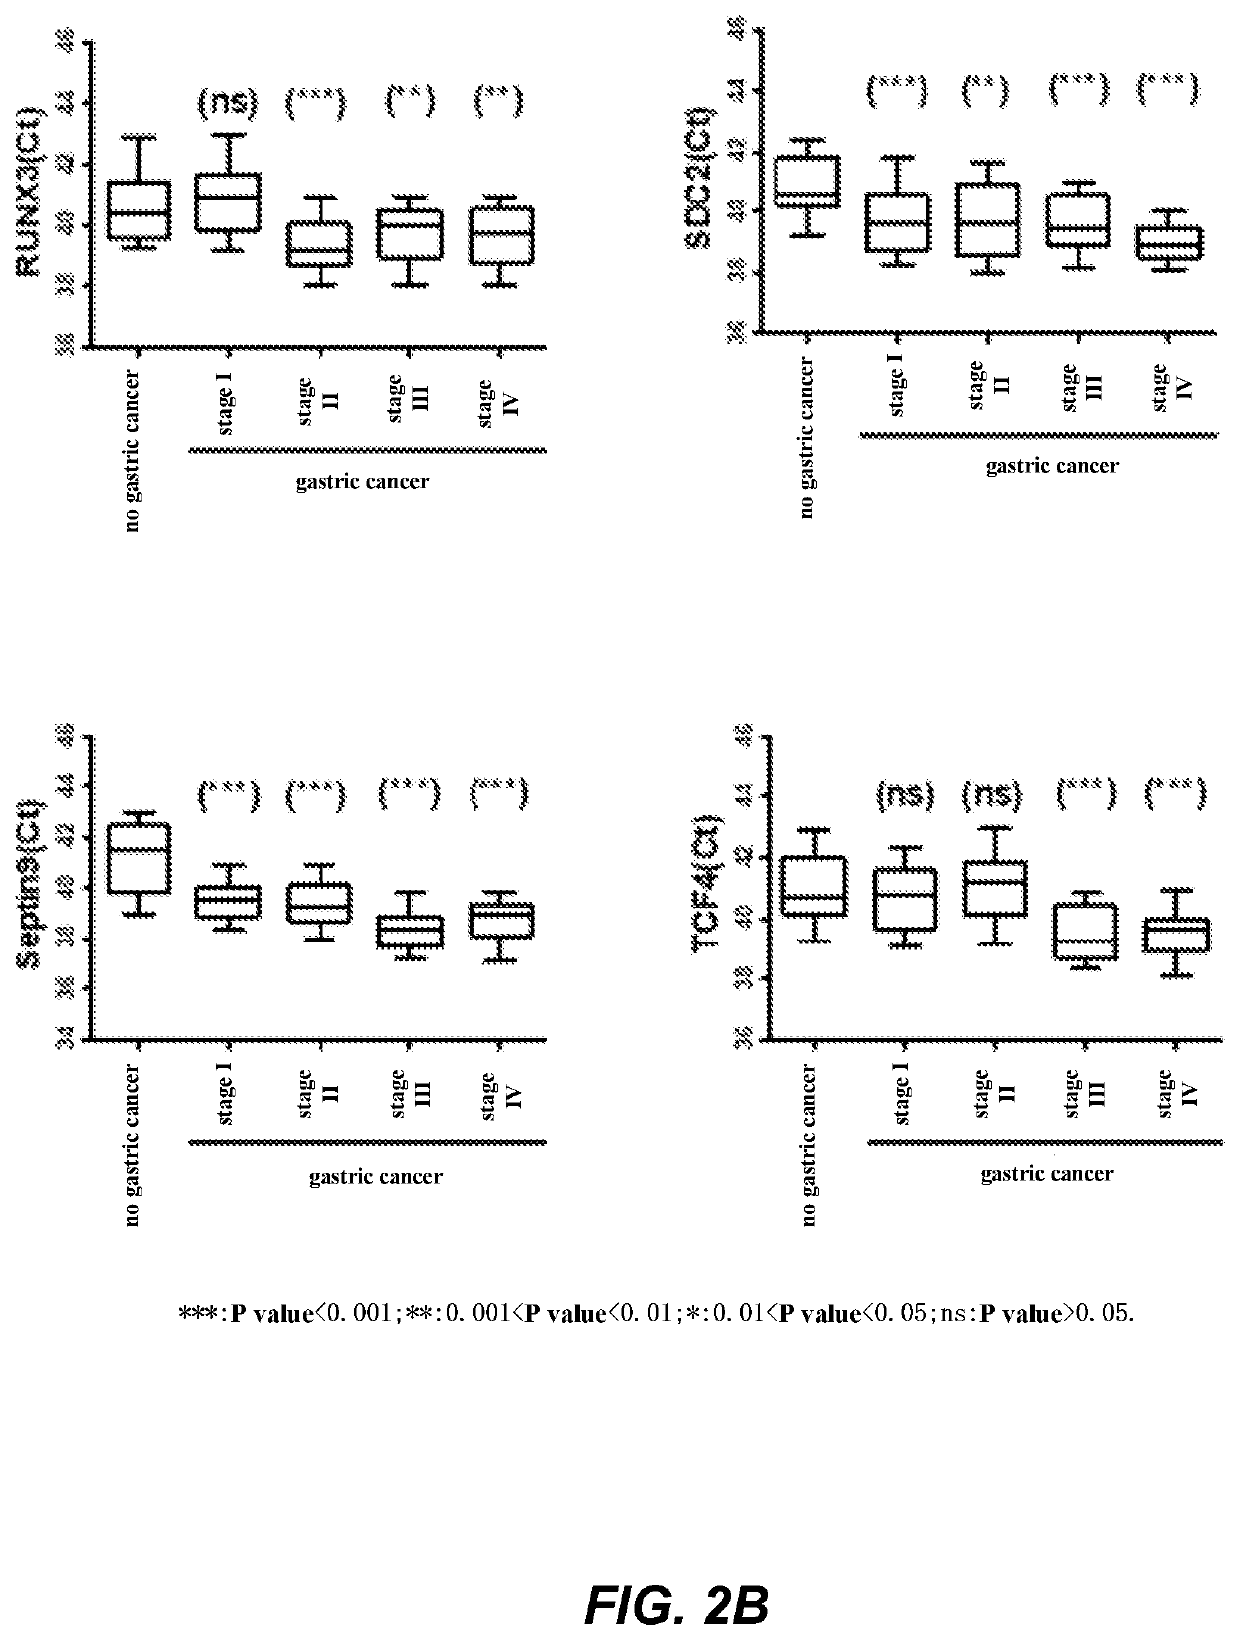 Method and kit for identifying gastric cancer status